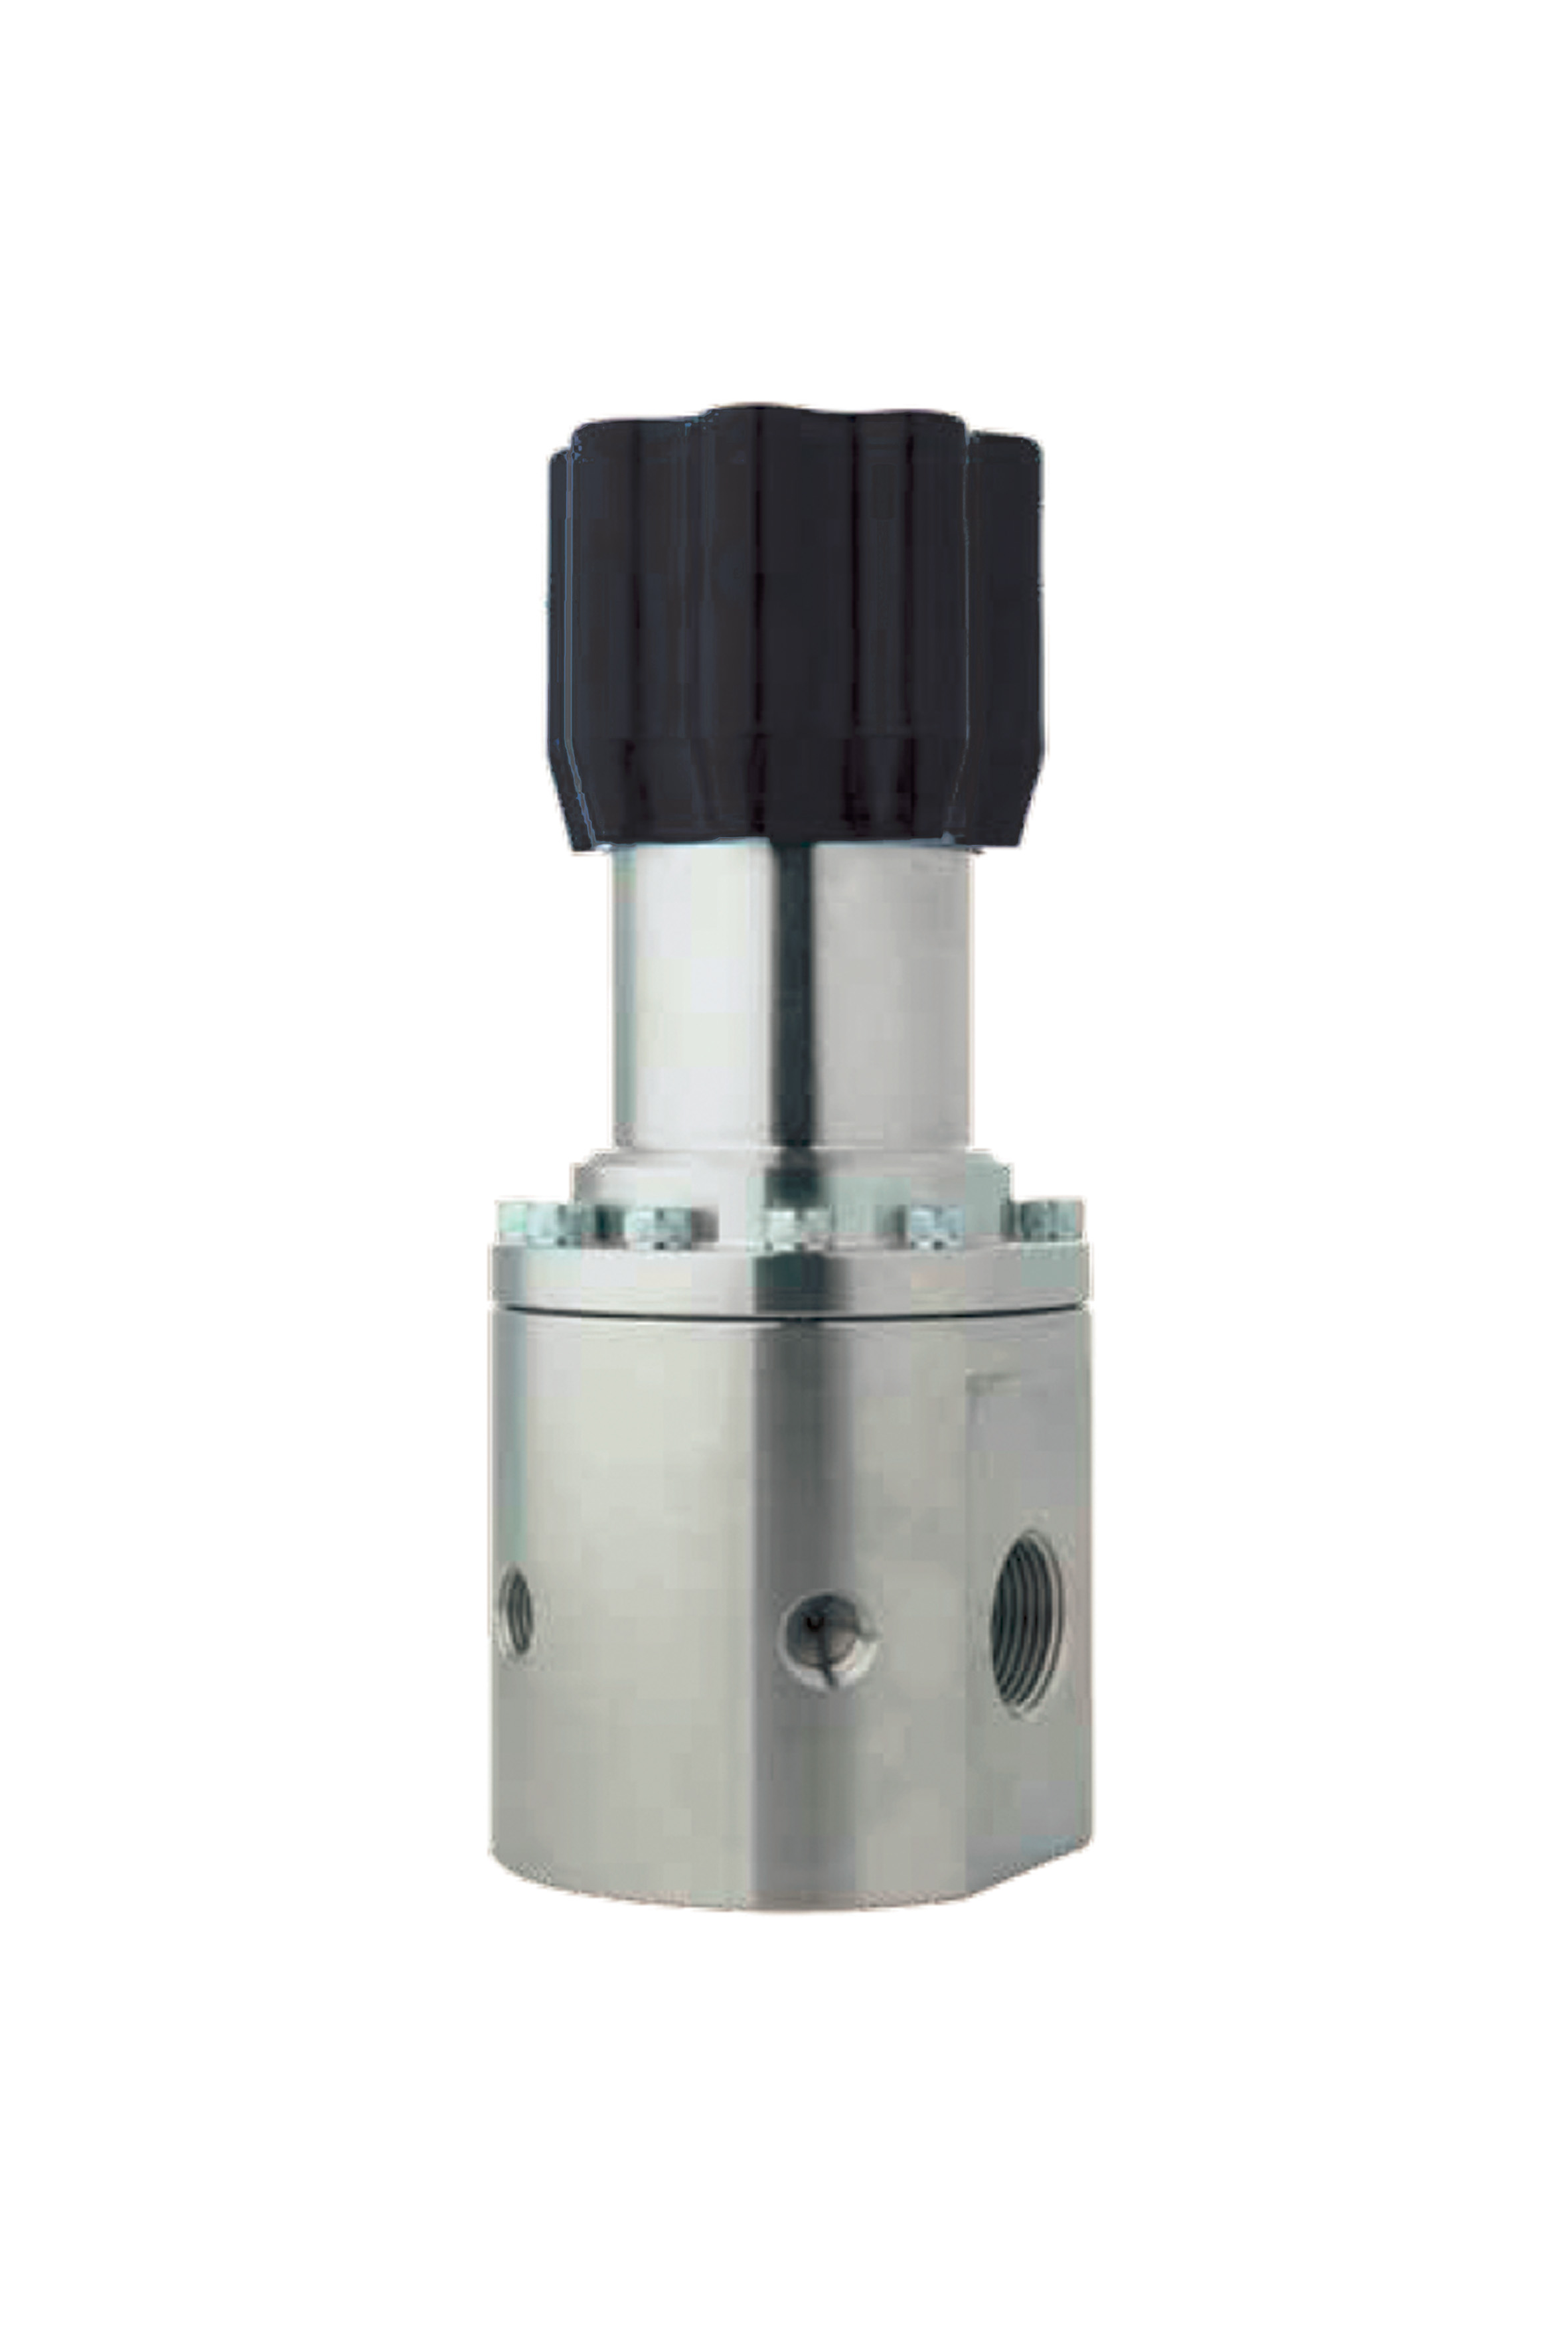 CYLINDER VALVES from GCE Group, leading manufacturer of gas flow control  equipment - GCE Group